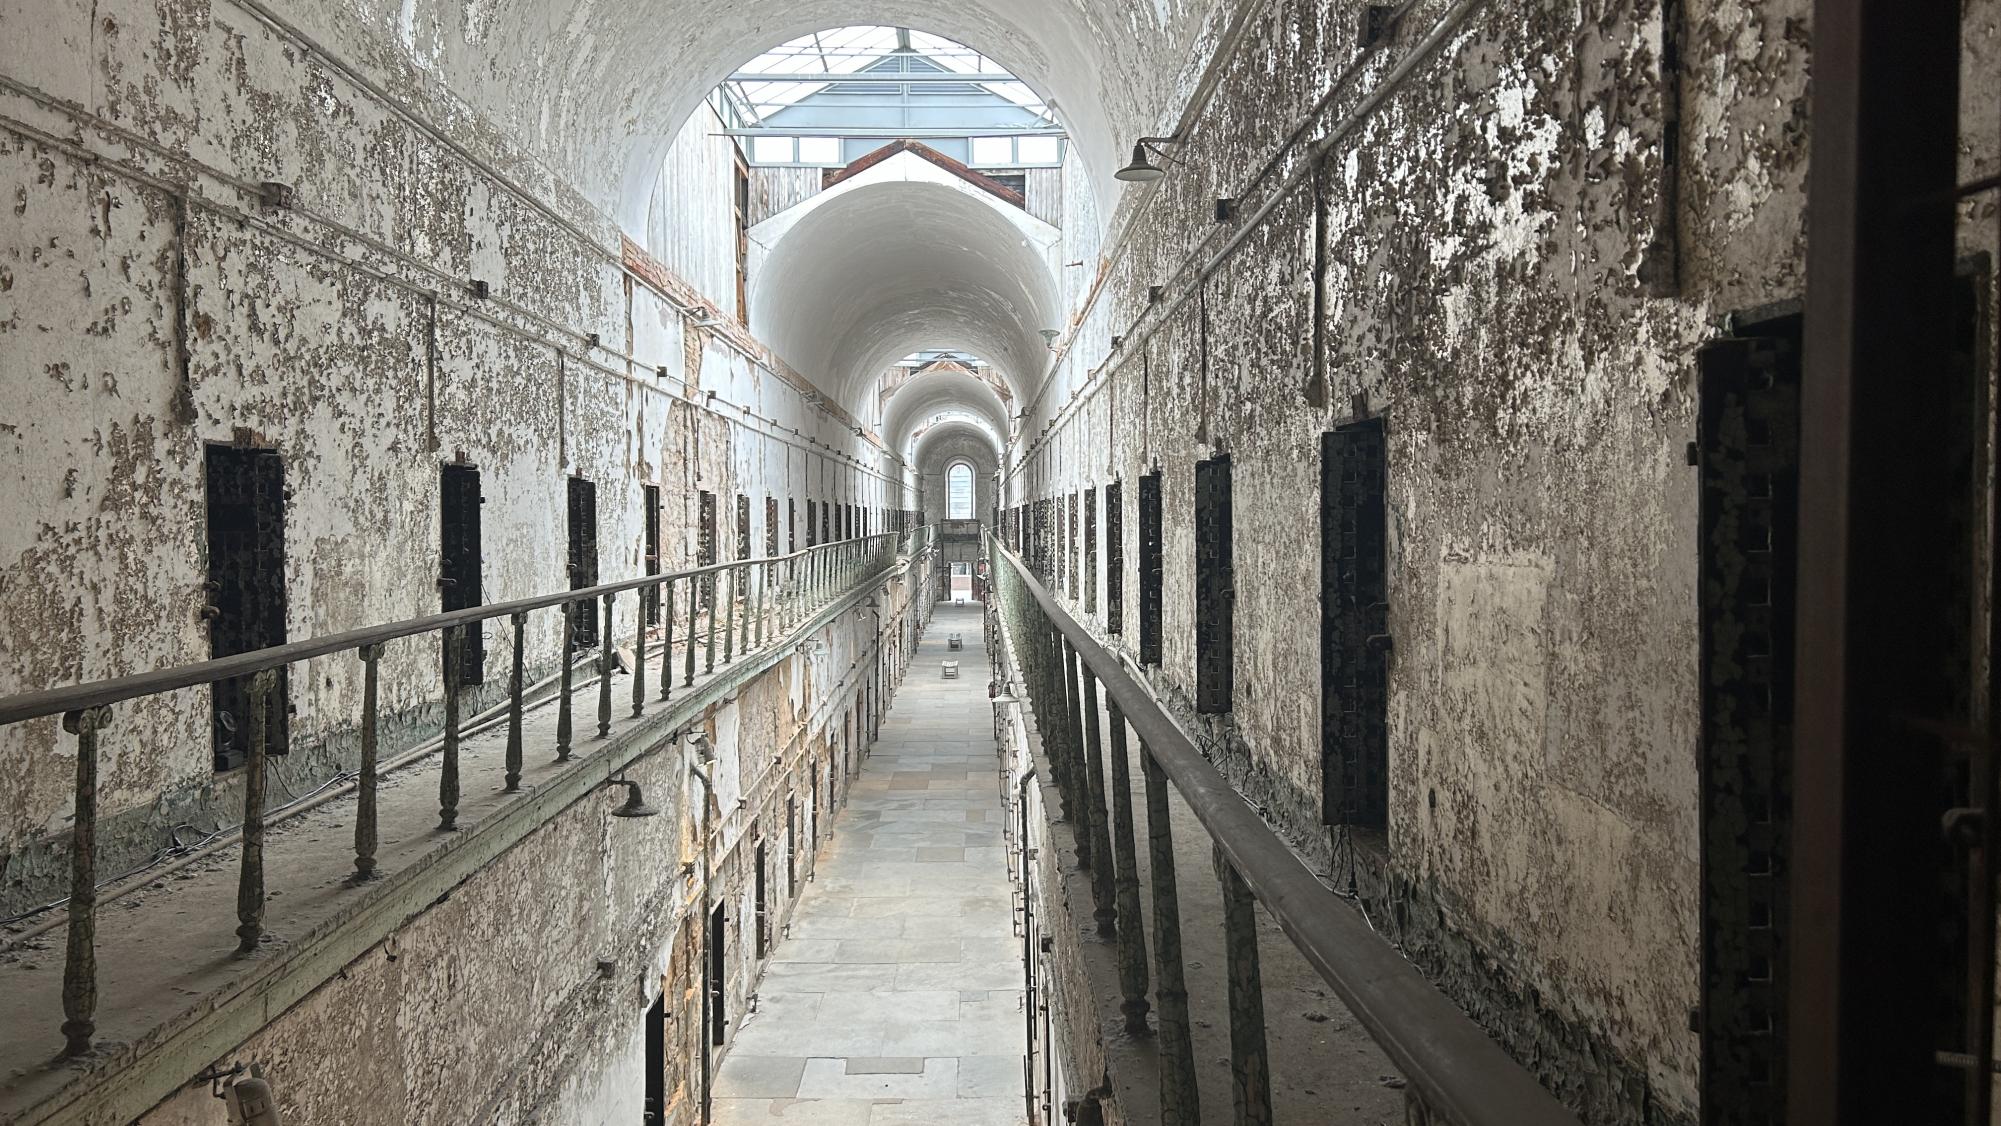 Del+Vals+Crime+and+Lit+and+Criminal+Justice+classes+visit+the+Eastern+State+Penitentiary.